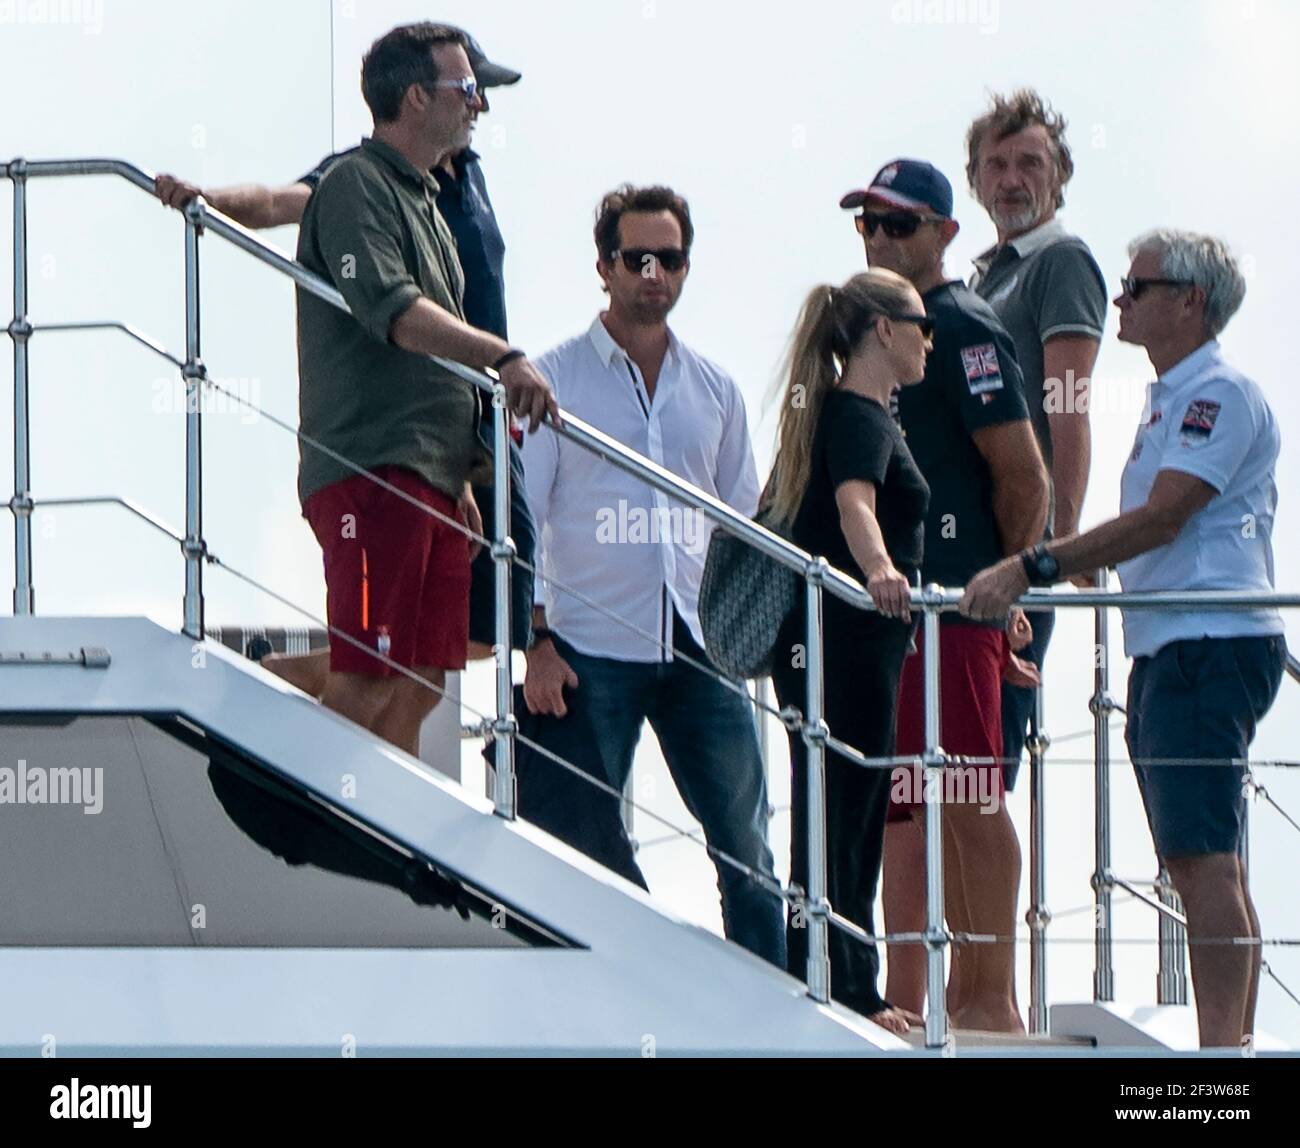 Auckland, New Zealand, 17 March, 2021 -  Owner of Ineos Team UK sailing team British billionaire Sir Jim Ratcliffe (2nd from right) prepares to view the final race of the 36th America's Cup on Auckland's Waitemata Harbour from his $100,000,000 super yacht Sherpa. Pictured with him are Ineos Team UK's founder and skipper Sir Ben Ainslie (white shirt)i with his wife Lady Ainslie (Georgie Thompson) and other guests. Following  Team New Zealand's (ETNZ) 7-3 victory over Italian challenger  Luna Rossa, Ineos Team UK are now believed to be the America's Cup Challenger of Record and will work with ET Stock Photo